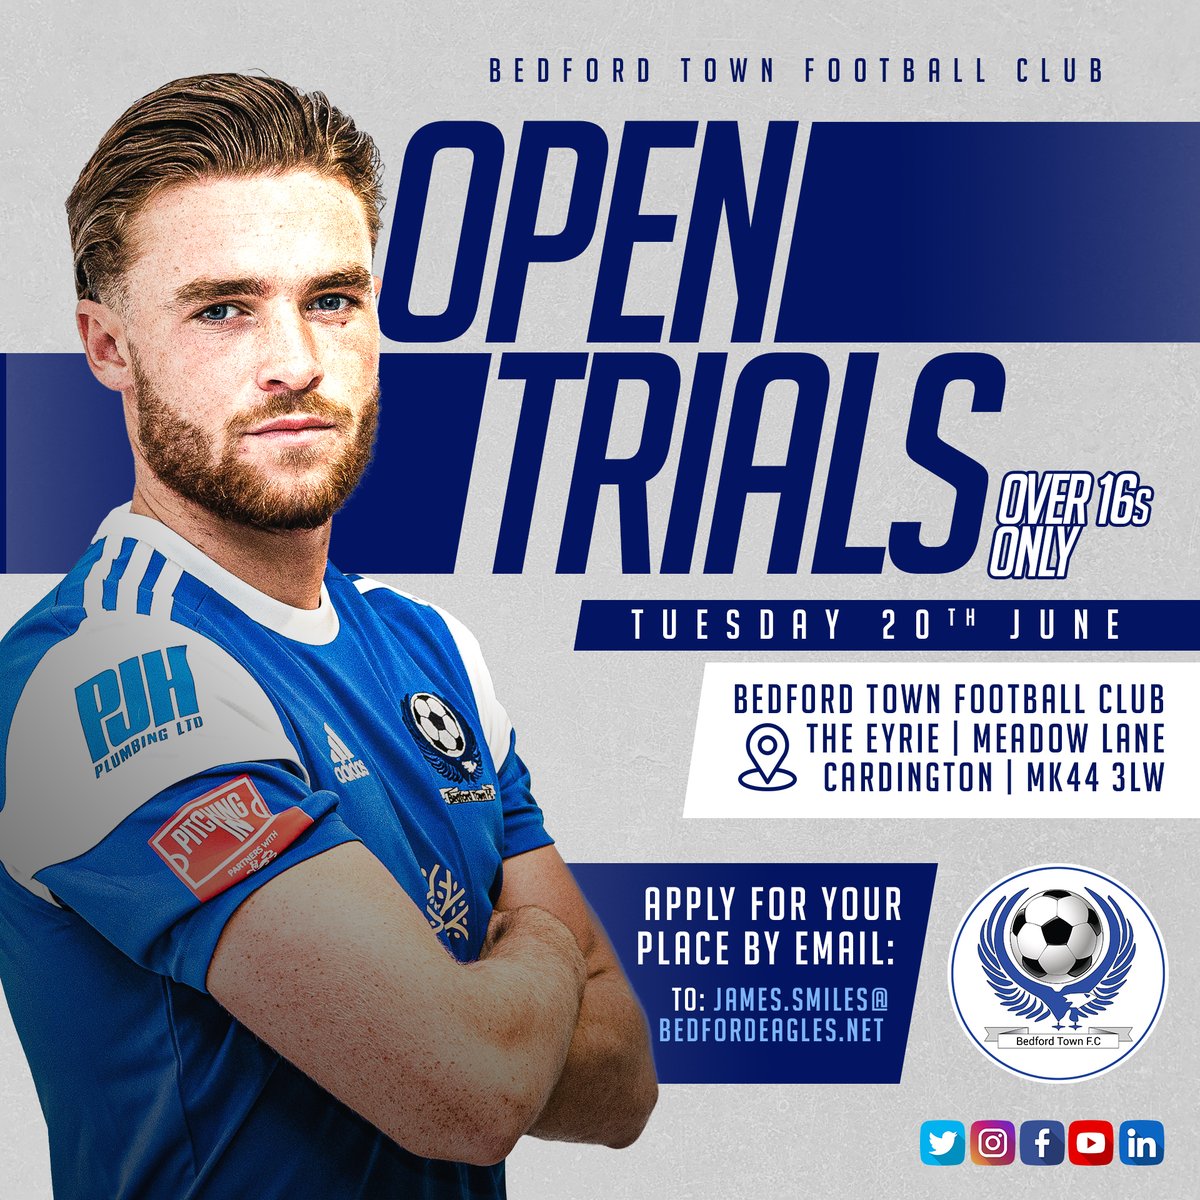 🦅 | 𝗢𝗽𝗲𝗻 𝗧𝗿𝗶𝗮𝗹𝘀 ⚽ BTFC will be holding open trials on Tuesday 20th June, prior to the 2023/24 season ✍️ Players must apply in writing to be considered. Please apply via email to 👇 📩 james.smiles@bedfordeagles.net More info pitchero.com/clubs/bedfordt…